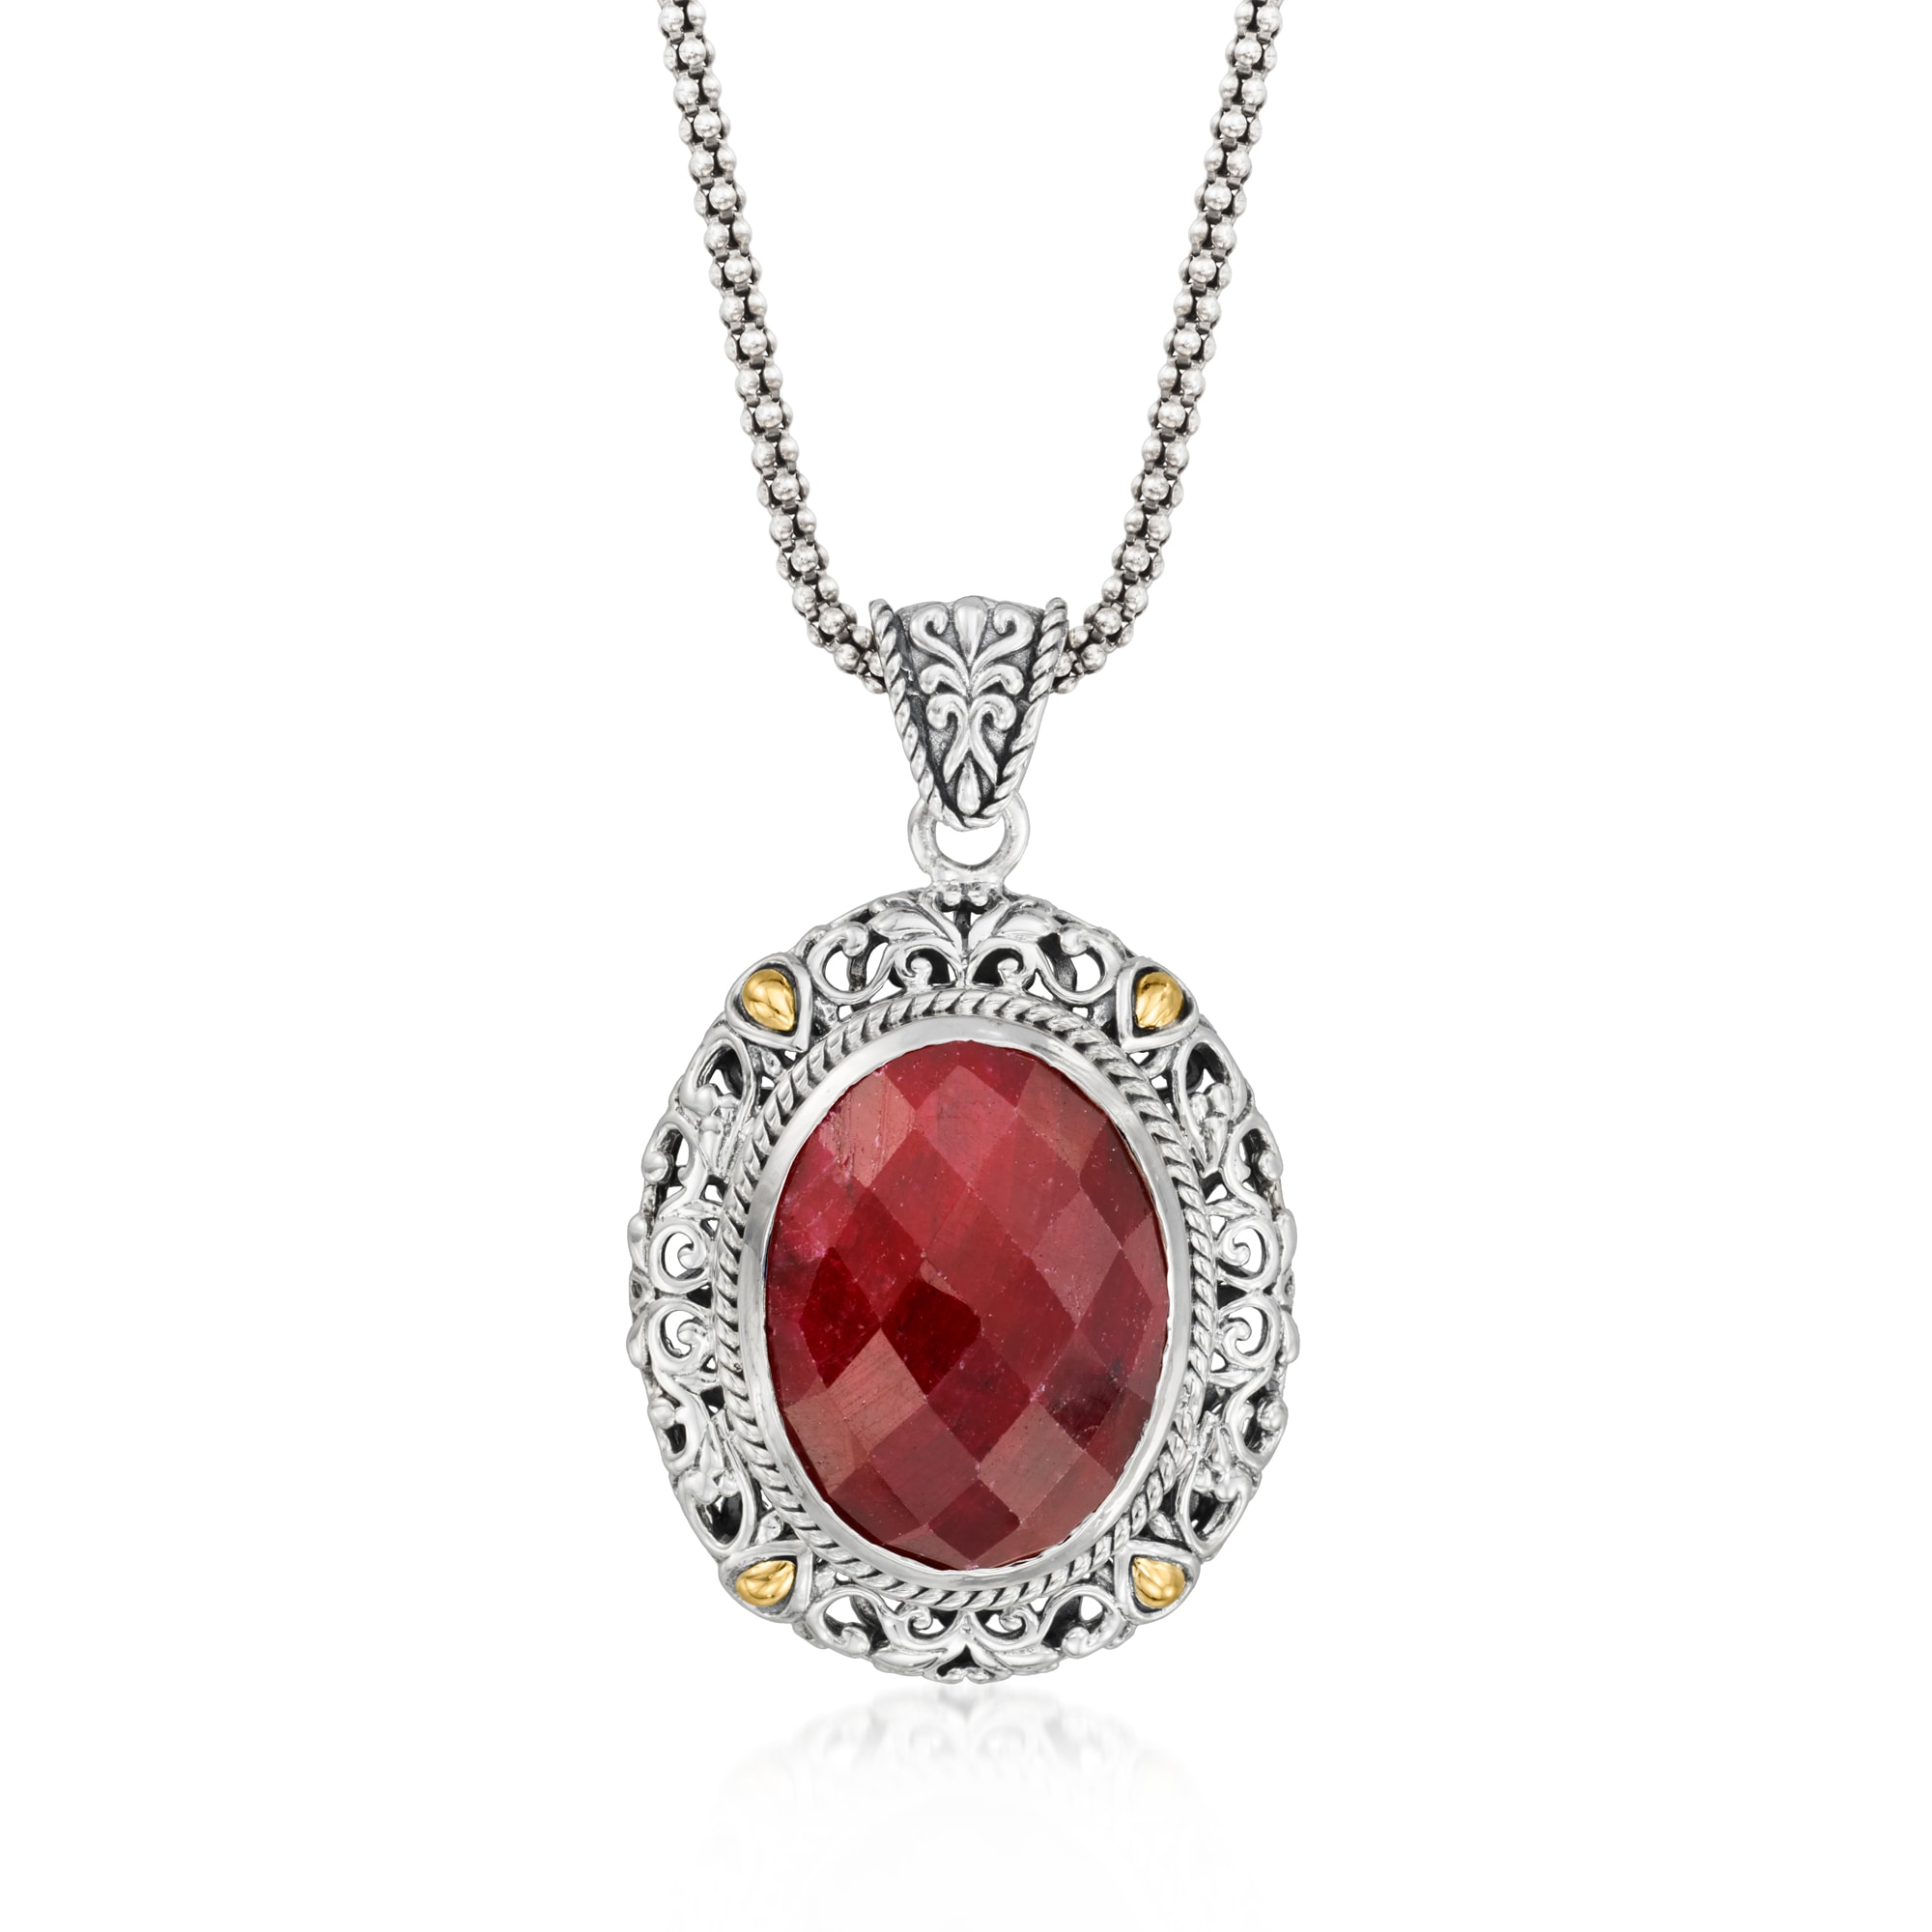 18.00 Carat Ruby Bali-Style Pendant Necklace in Sterling Silver with 18kt Yellow Gold. 18" | Ross-Simons